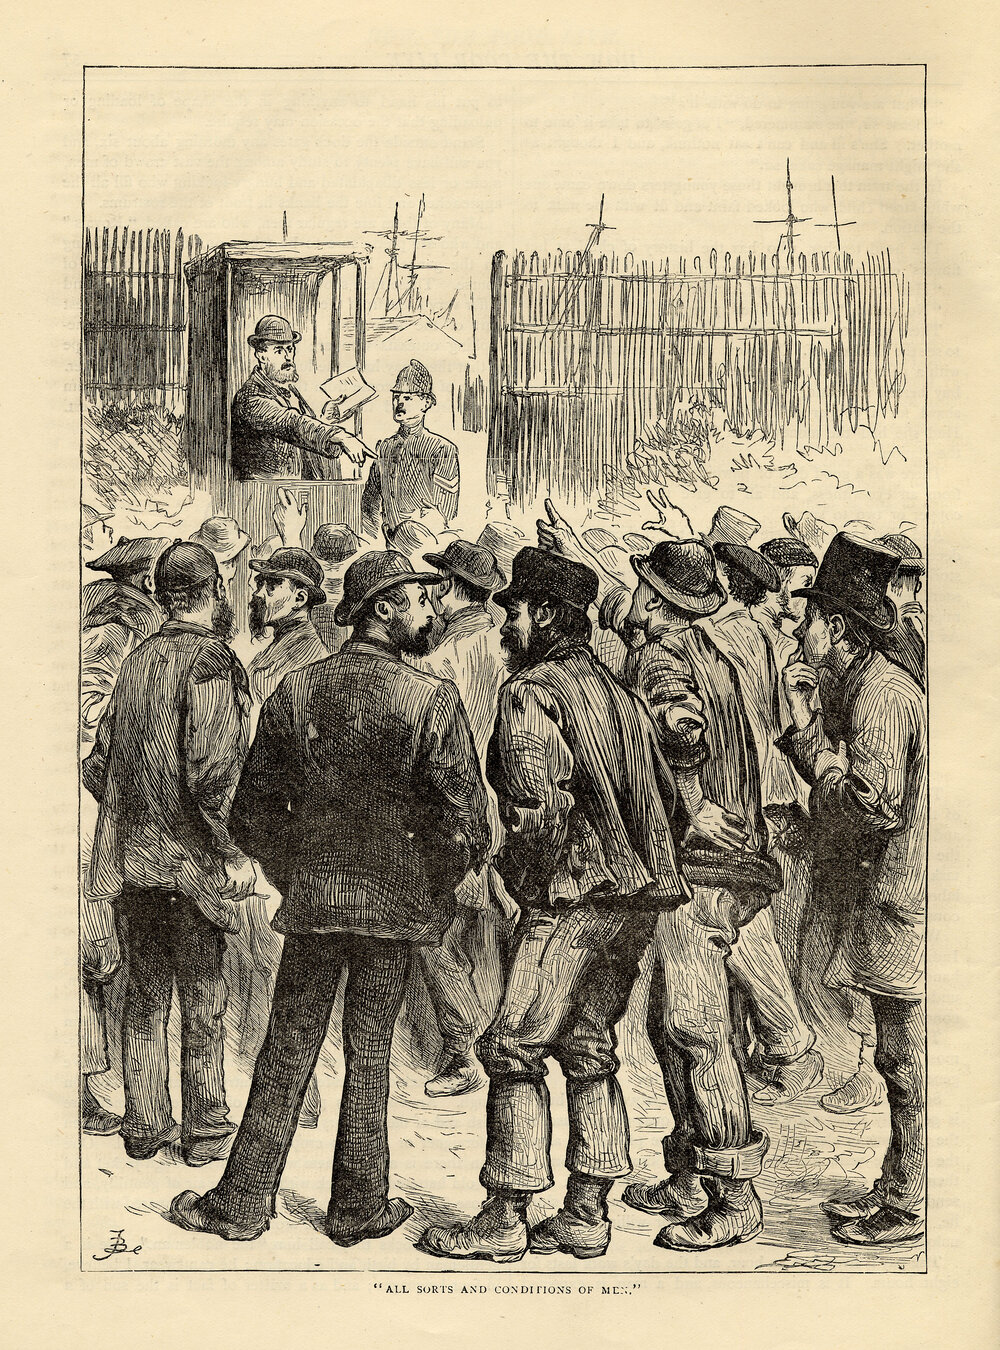 Casuals at dock gates, 1889